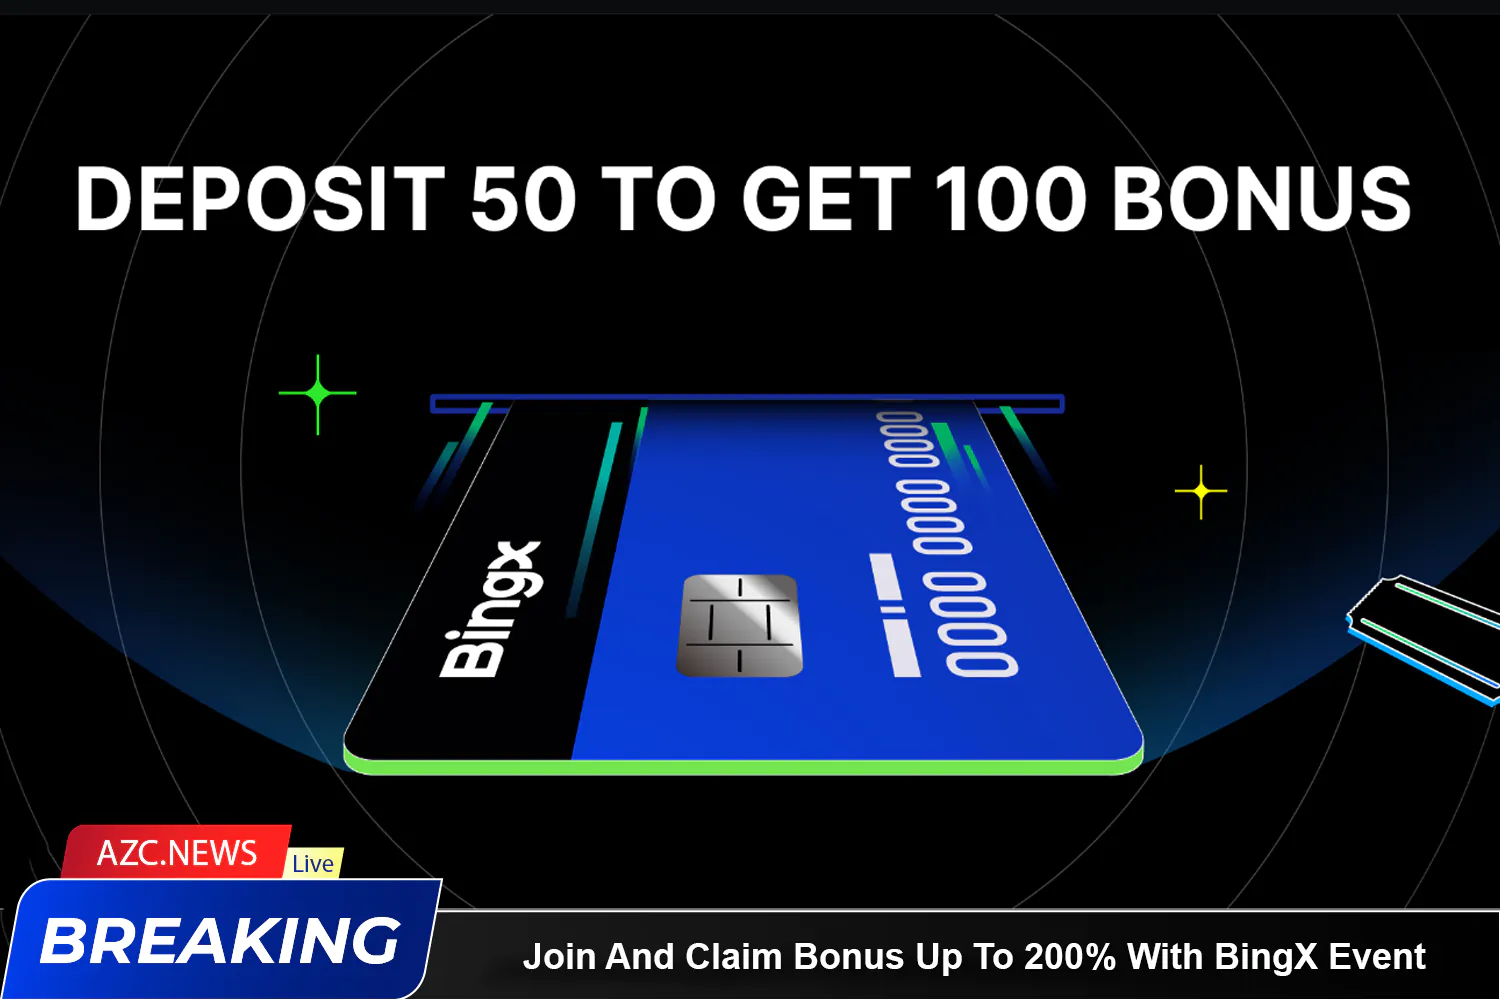 Join And Claim Bonus Up To 200% With Bingx Event